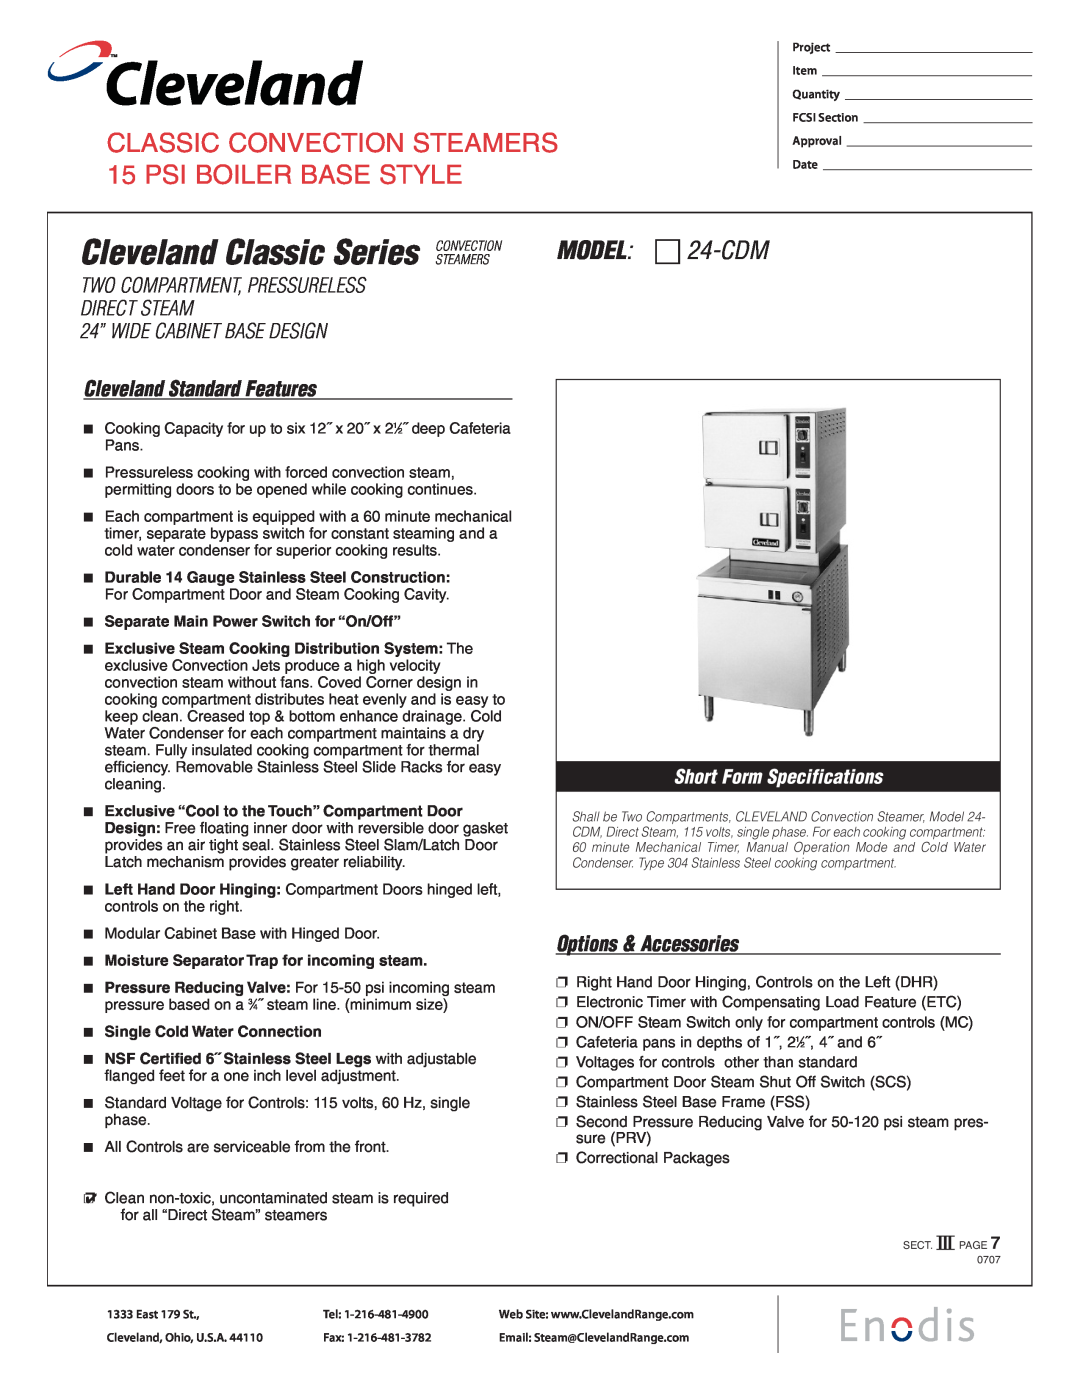 Cleveland Range 24-CDM specifications Cleveland Classic Series, CLASSIC CONVECTION STEAMERS 15 PSI BOILER BASE STYLE 